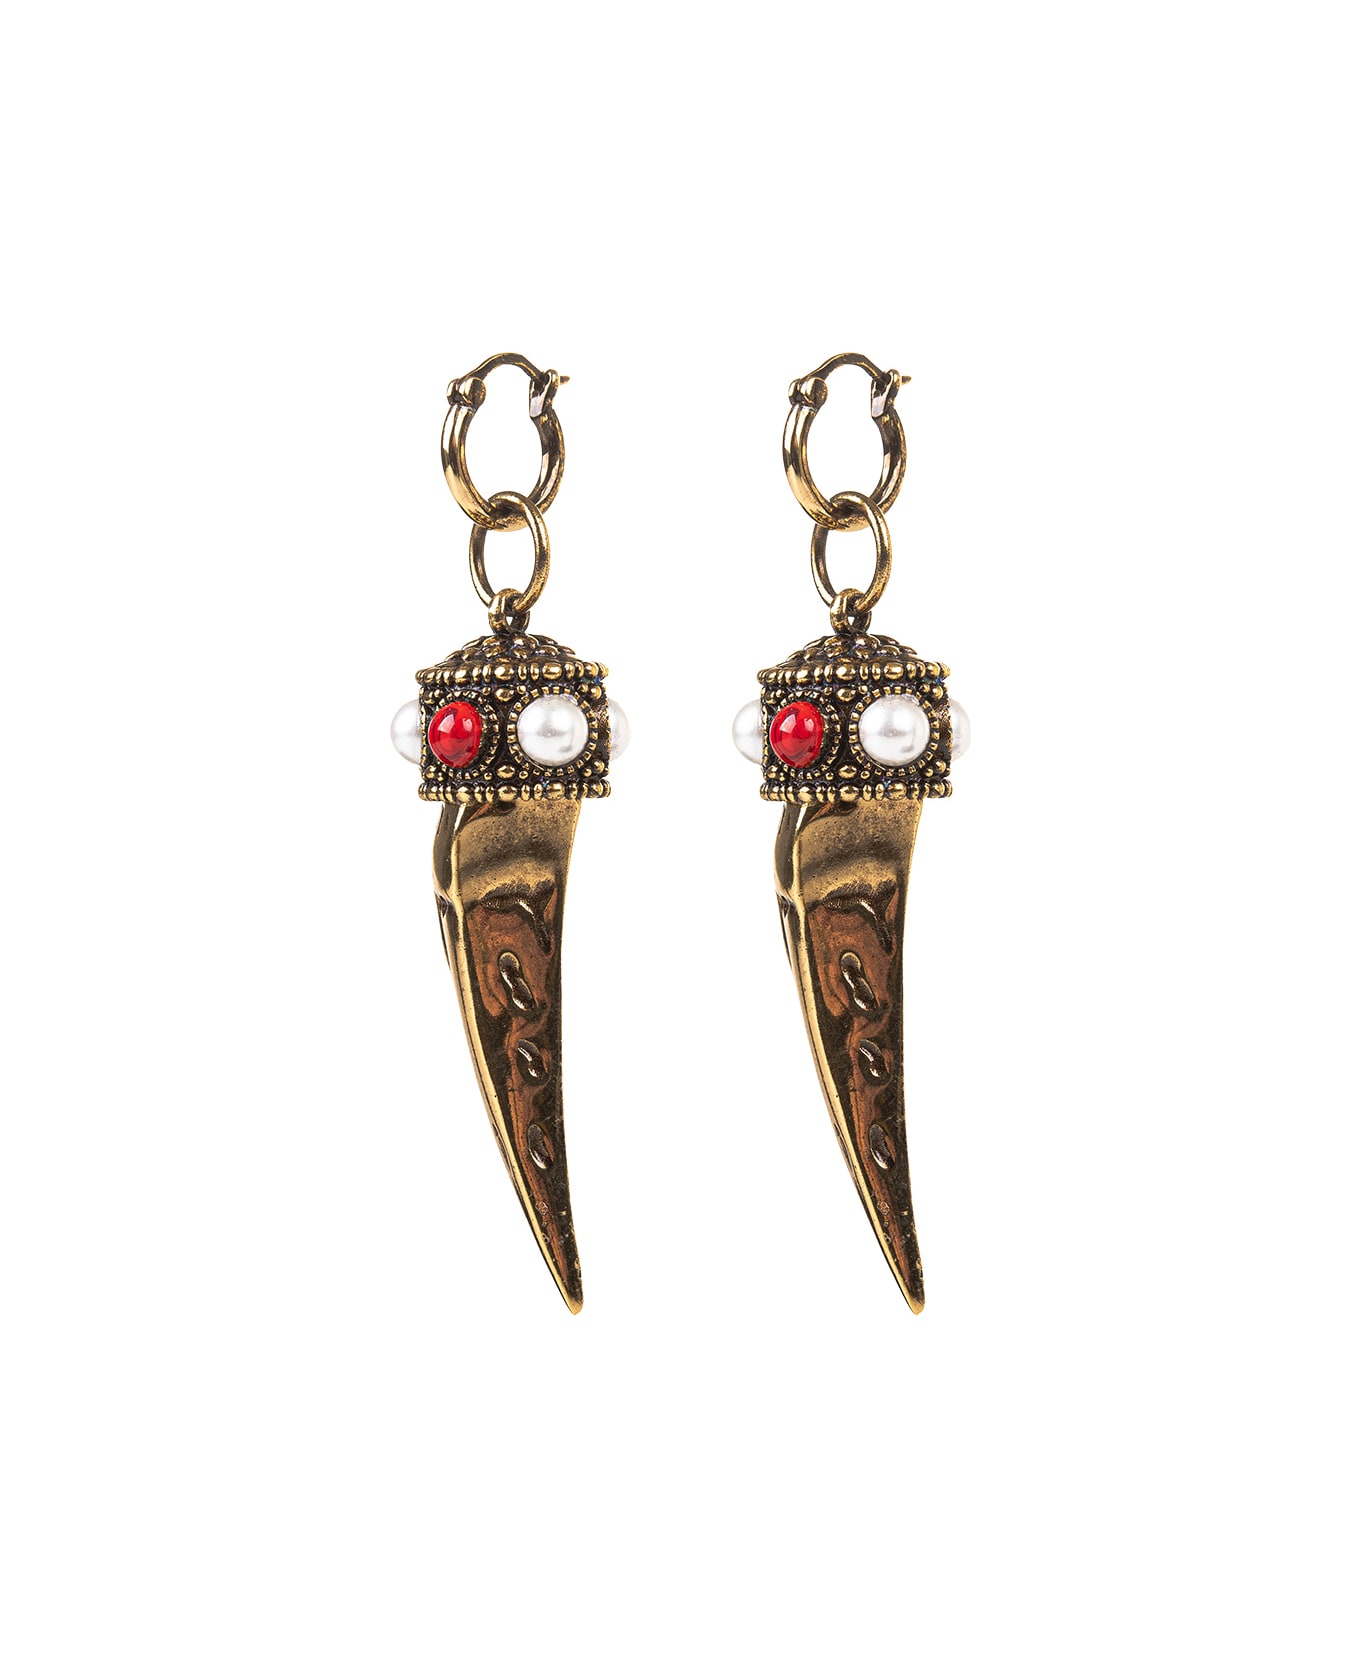 Roberto Cavalli Earrings With Tusk And Decoration - Gold